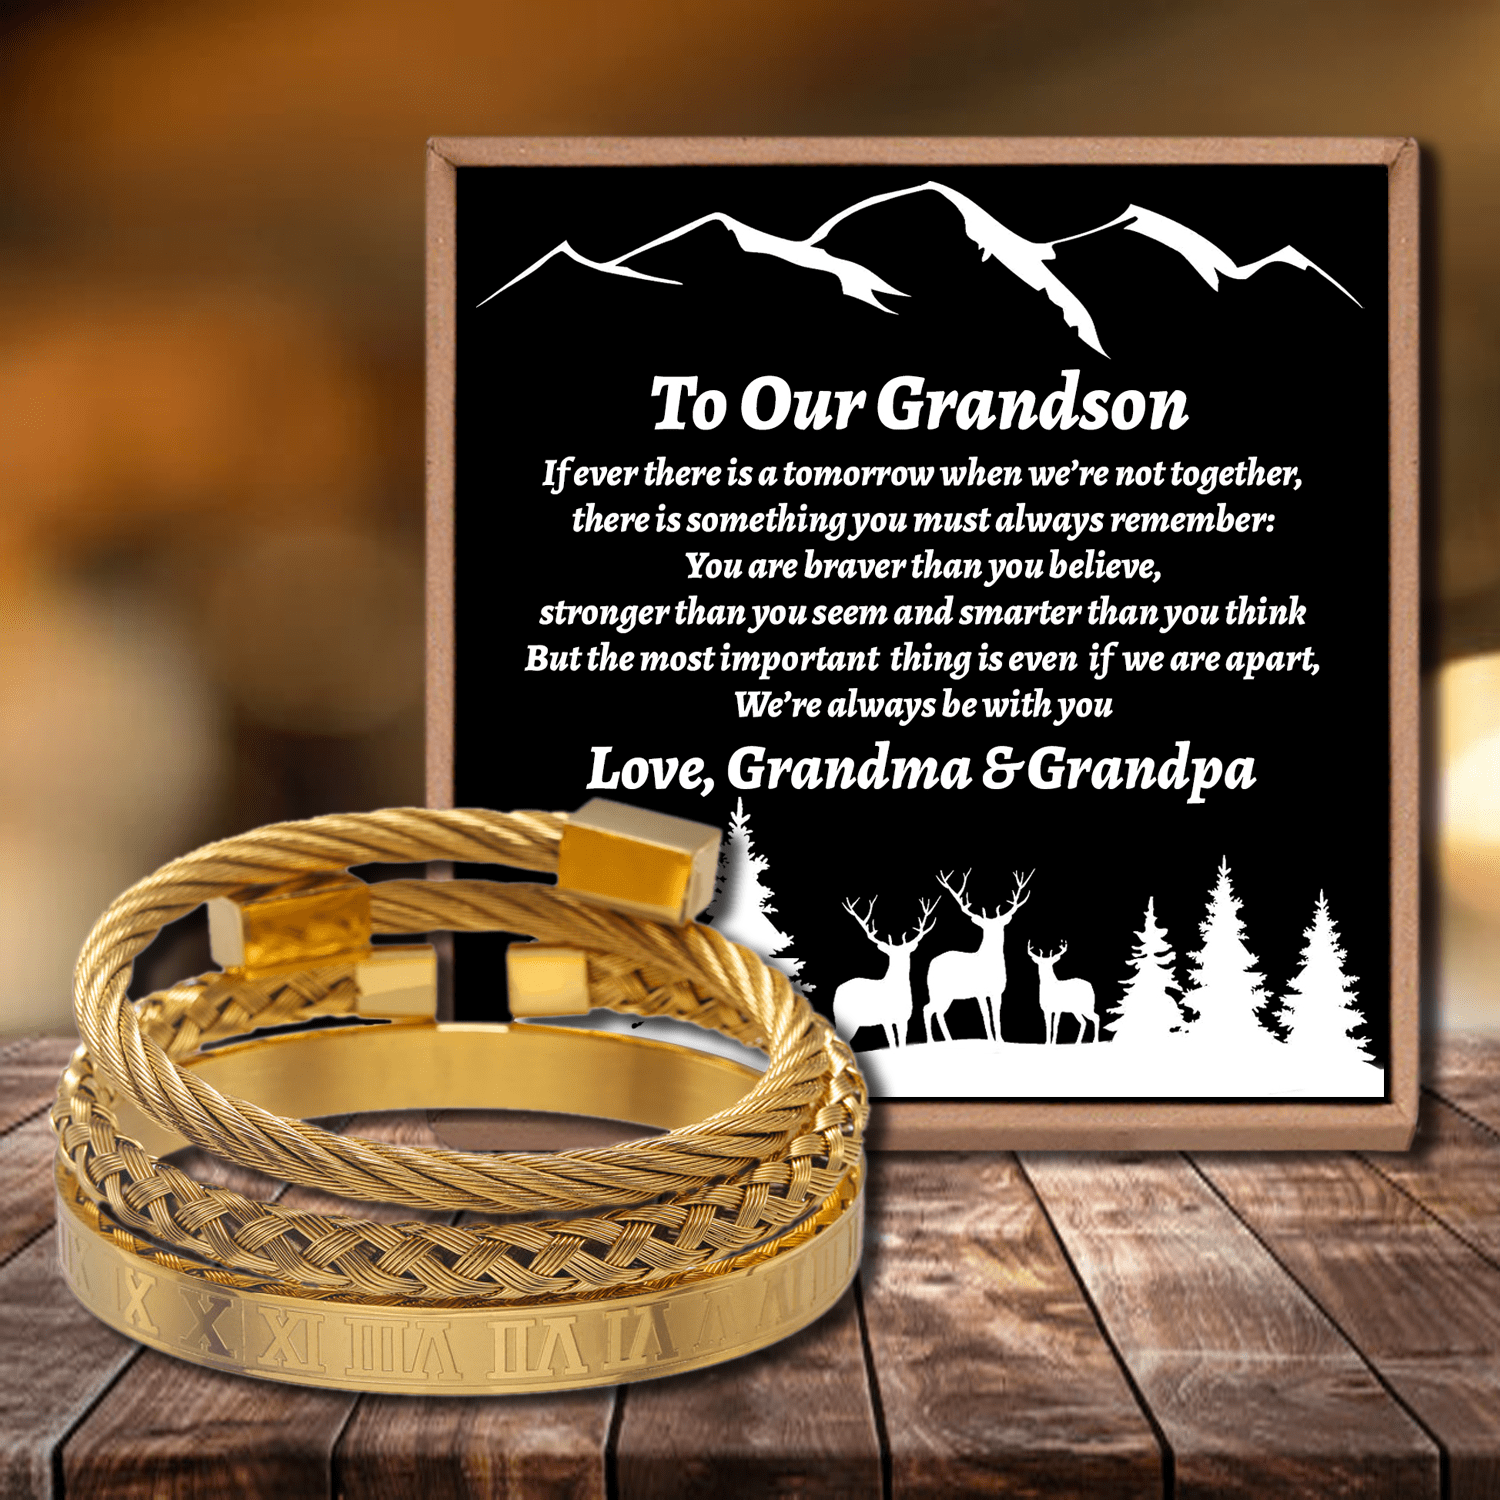 Bracelets To Our Grandson - We Are Always Be With You Roman Numeral Bracelet Set Gold GiveMe-Gifts